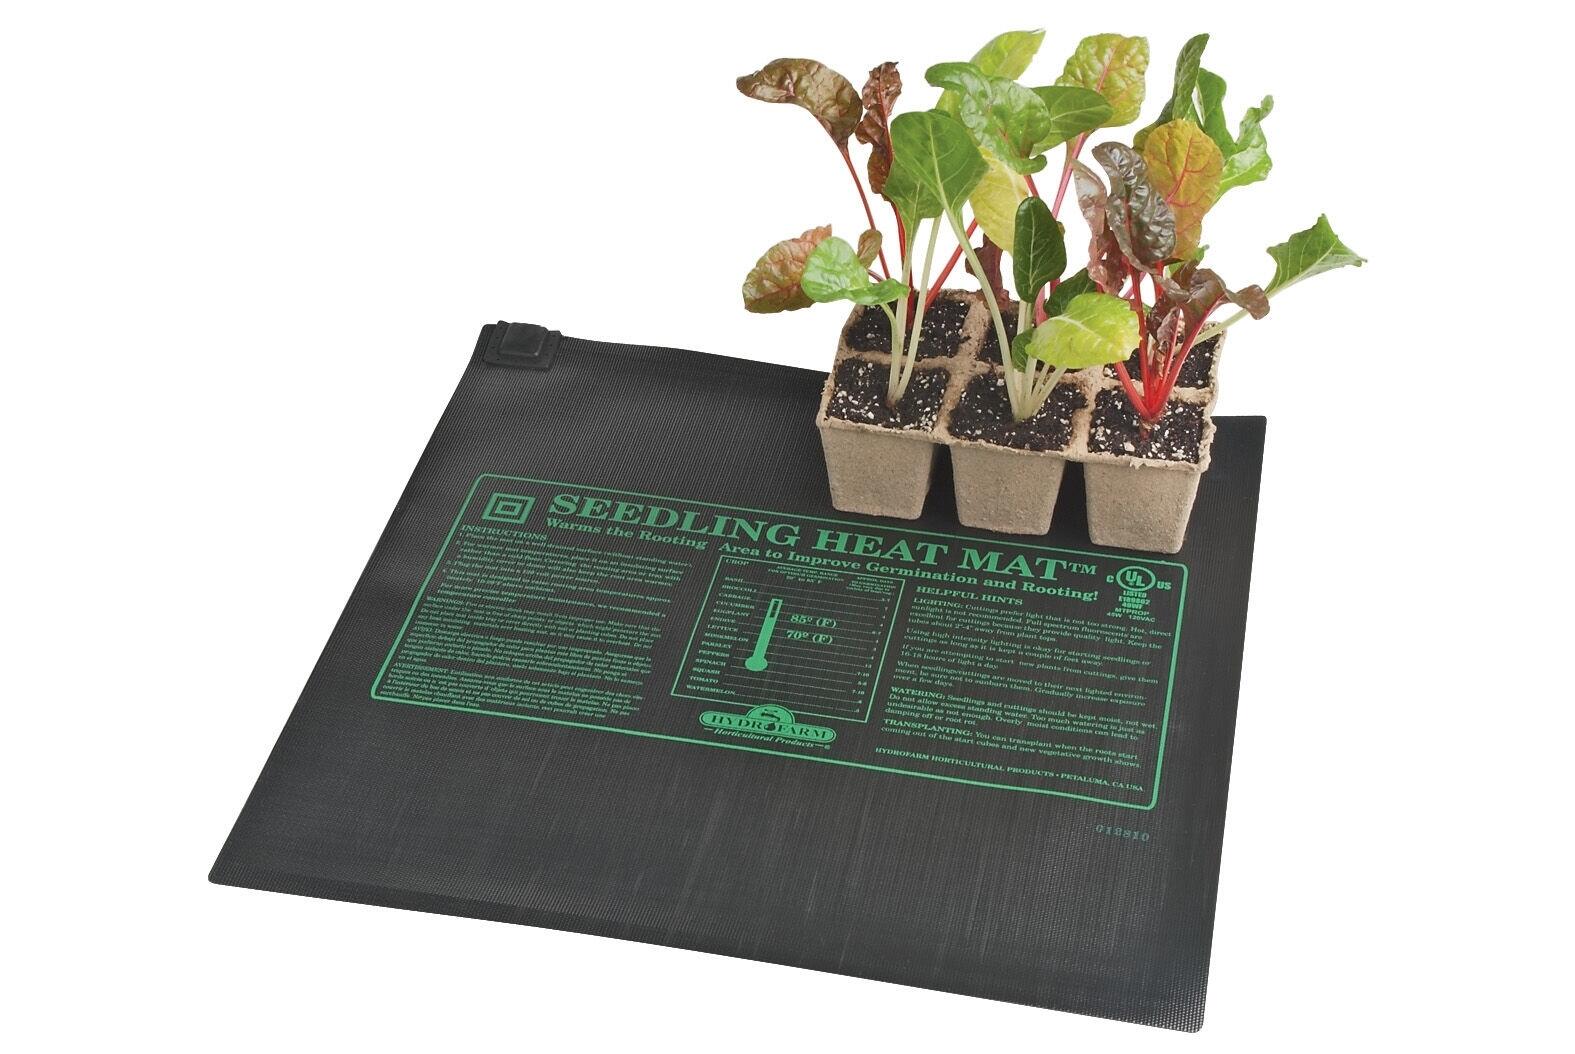 cuttings 105 watts germination Heated mat large 121cmx52cm for seedlings 